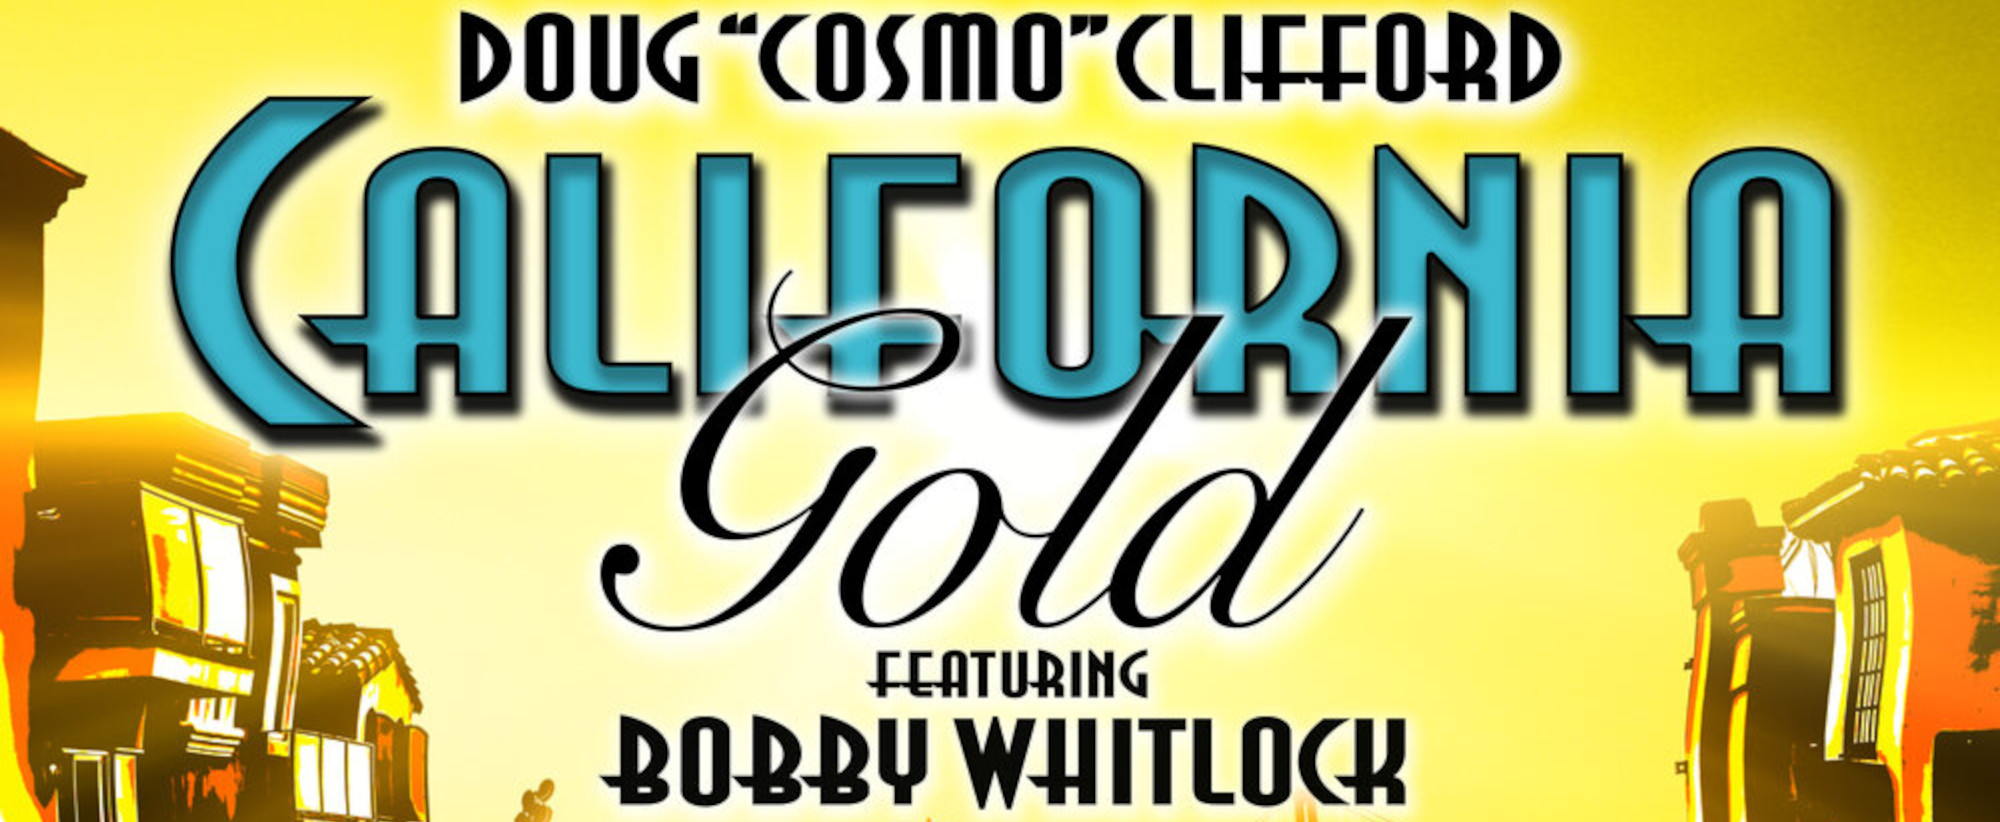 CCR’s Doug Clifford to Release Lost LP ‘California Gold’ Featuring Bobby Whitlock